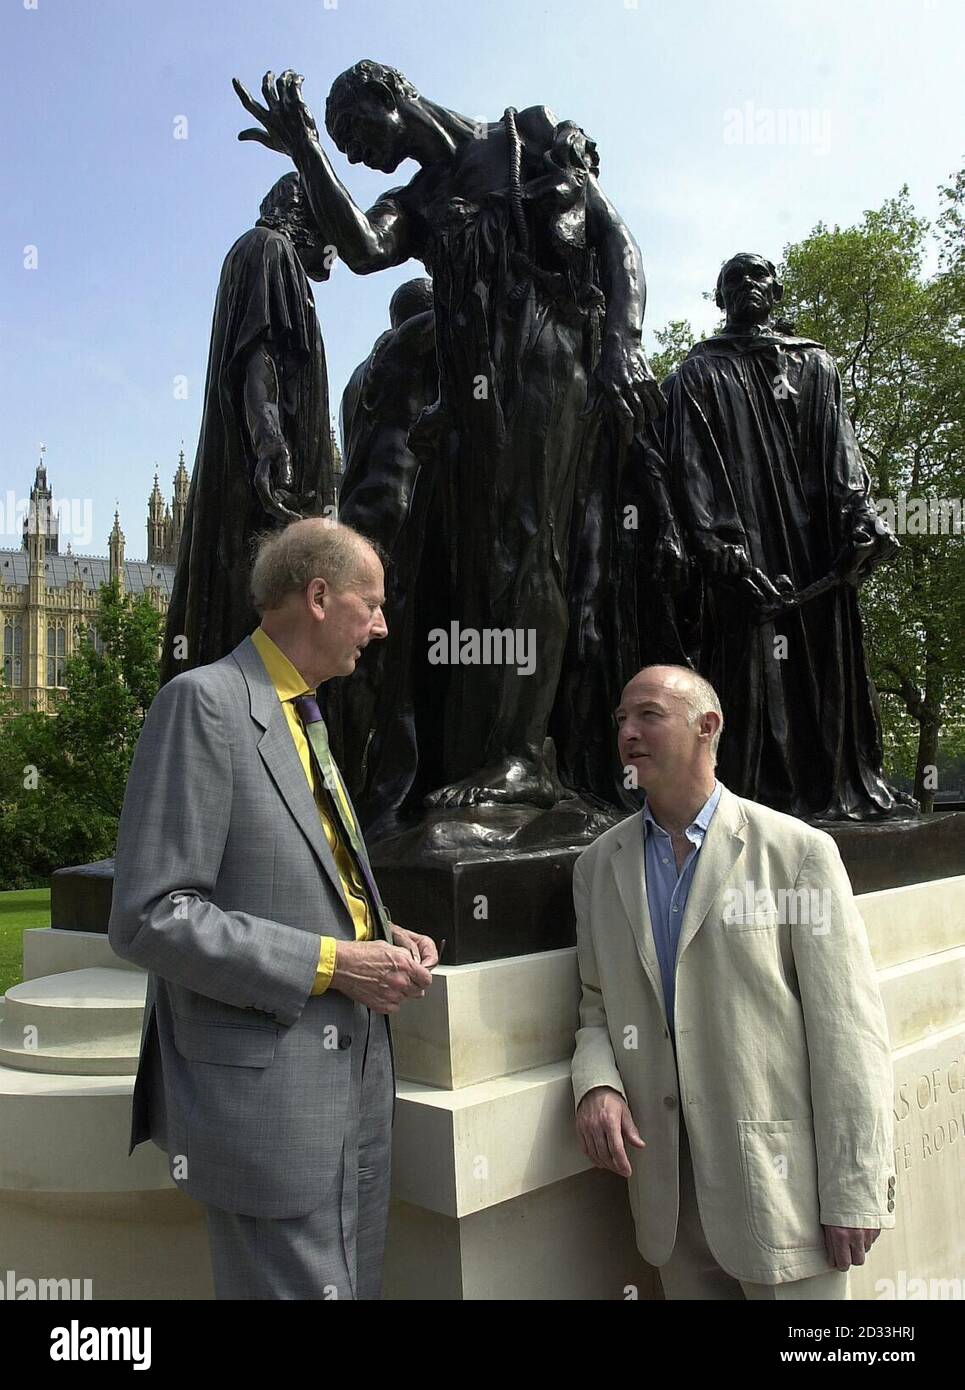 Sir Nicholas Goodison, former Chairman of the Art Fund with Rupert Harris, conservation expert (right) who lead the conservation work on The Burghers of Calais sculpure unveiled in Victoria Tower Gardens by Sir Nicholas and his wife. The sculpture was originally removed for safekeeping in the Second World War and then removed to a low plinth in the 1950's. The 'Burghers of Calais' one of over 750,000 works that the National Art Collections Fund has saved for the UK since its foundation in 1903. Stock Photo